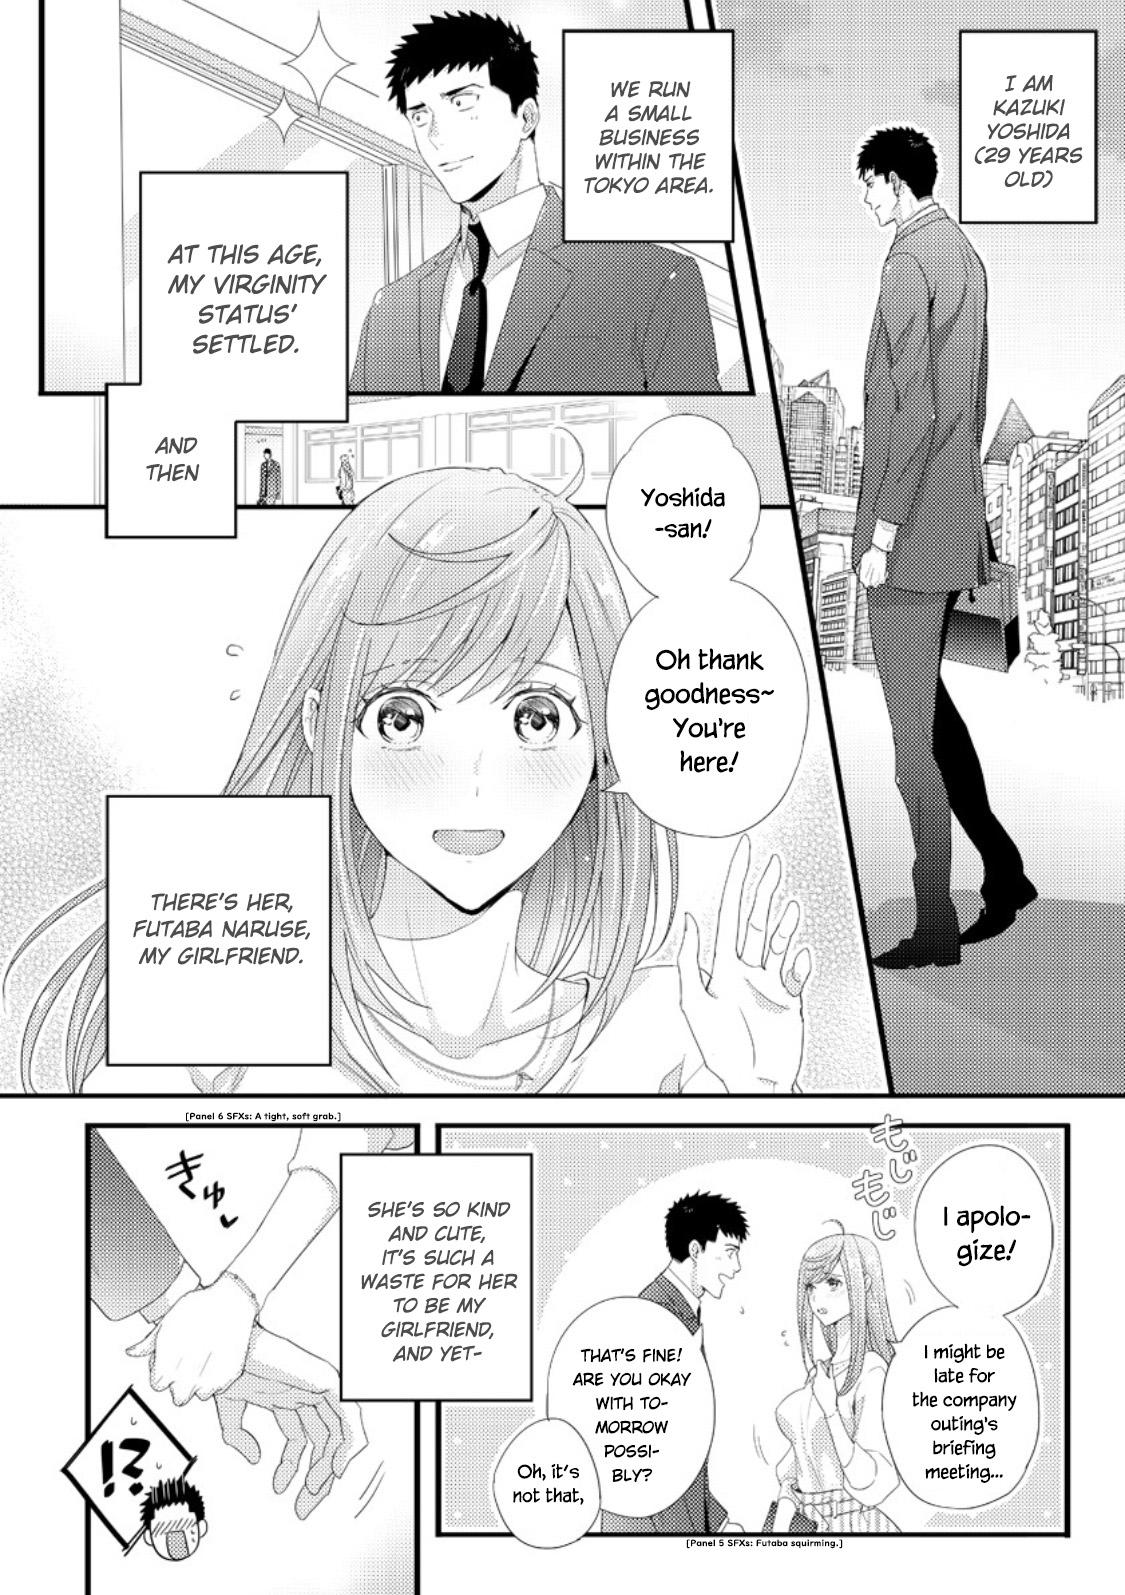 Family Please Let Me Hold You Futaba-san! Long - Page 2